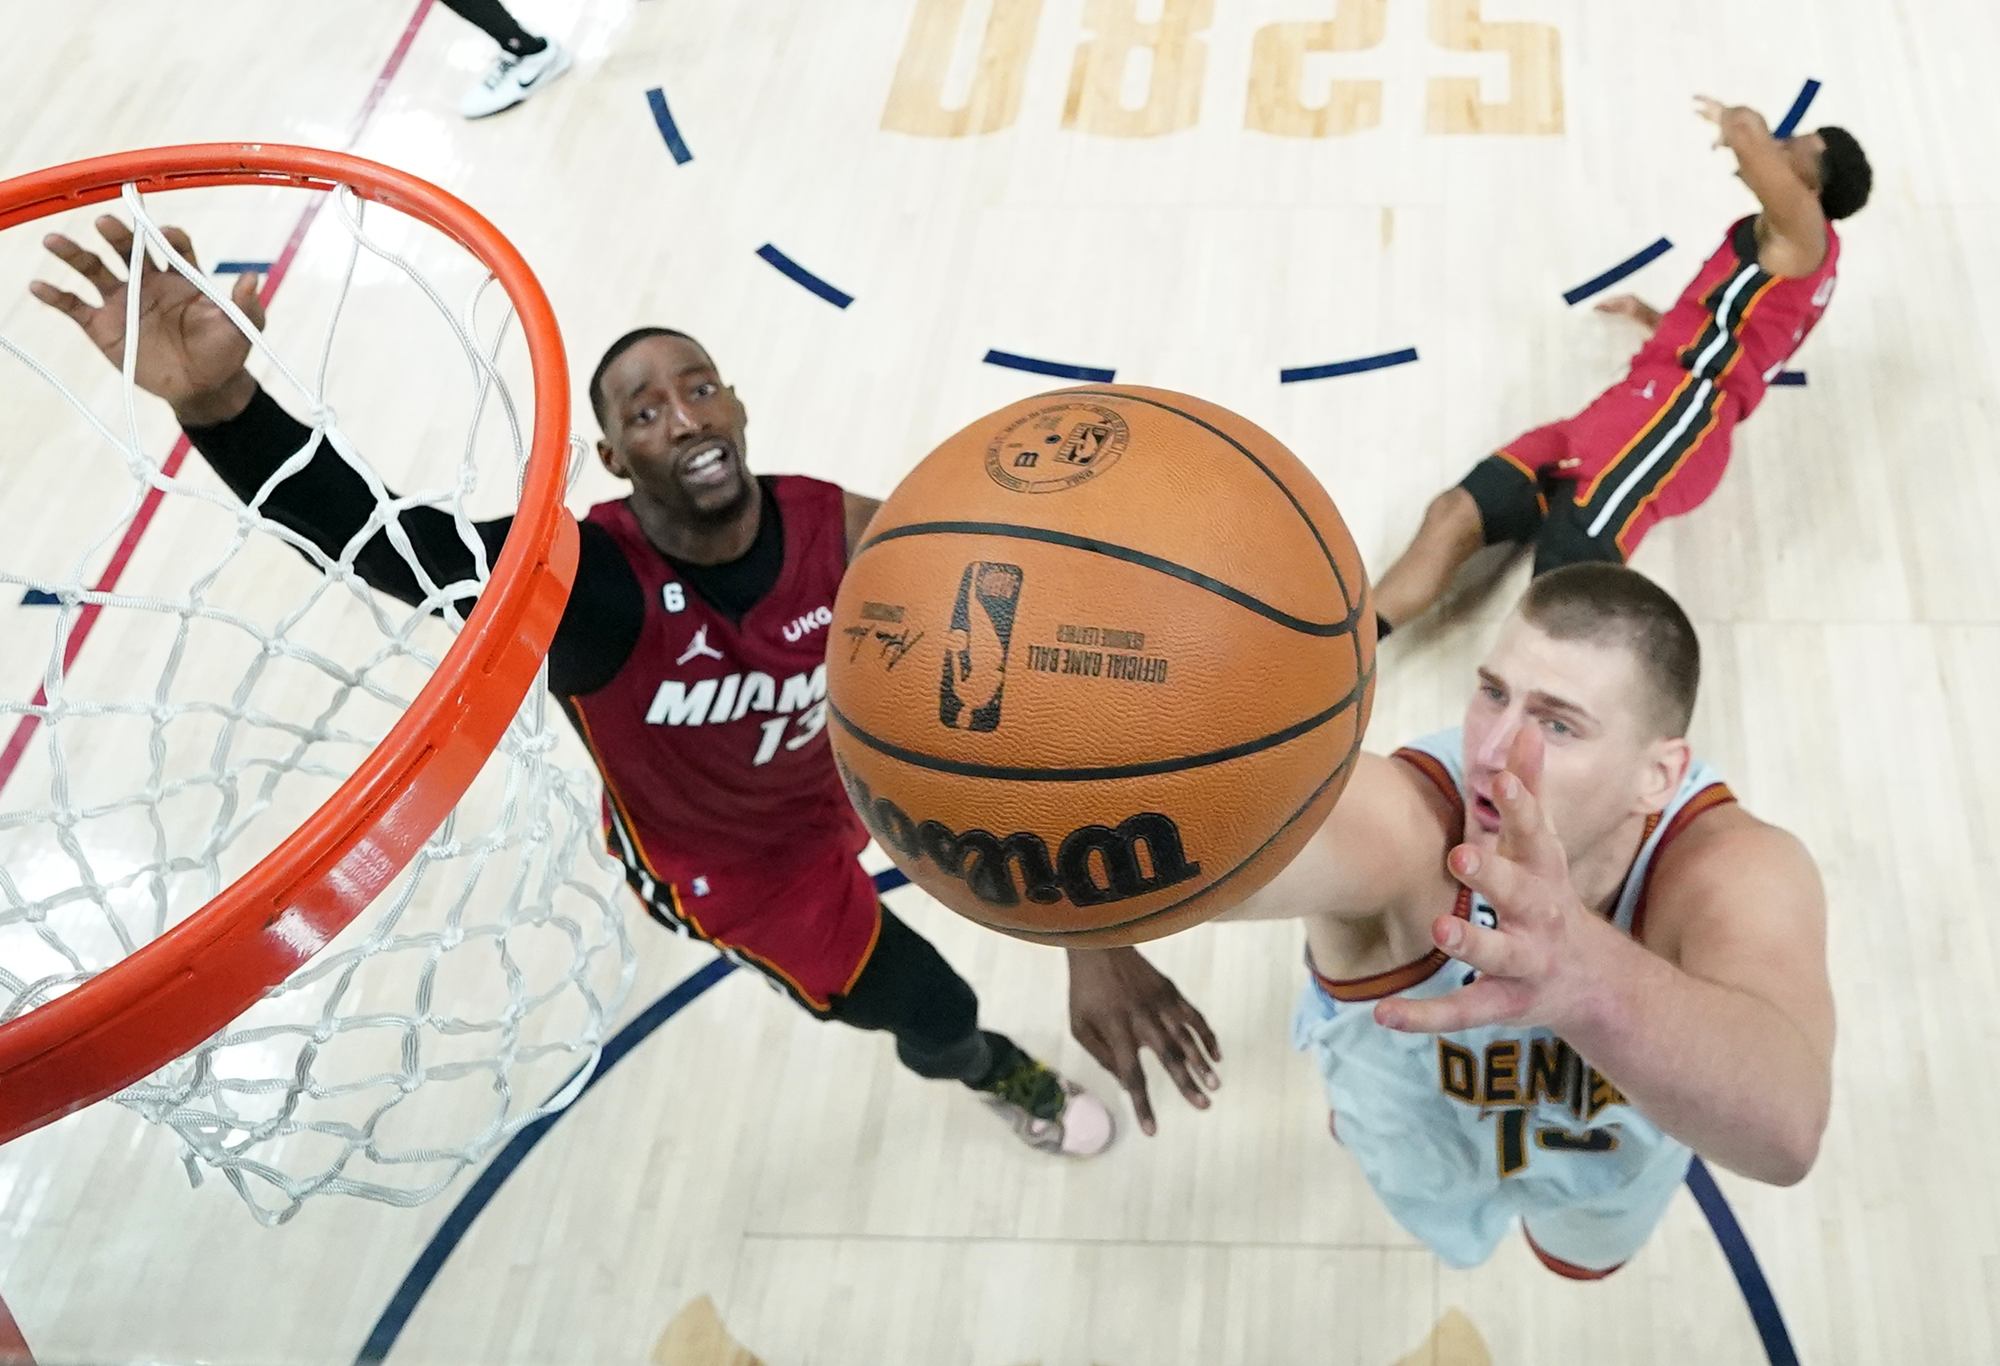 DENVER, COLORADO - JUNE 12: Nikola Jokic #15 of the Denver Nuggets drives to the basket against Bam Adebayo #13 of the Miami Heat during the first half in Game Five of the 2023 NBA Finals at Ball Arena on June 12, 2023 in Denver, Colorado. NOTE TO USER: User expressly acknowledges and agrees that, by downloading and or using this photograph, User is consenting to the terms and conditions of the Getty Images License Agreement. (Photo by Jack Dempsey - Pool/Getty Images)